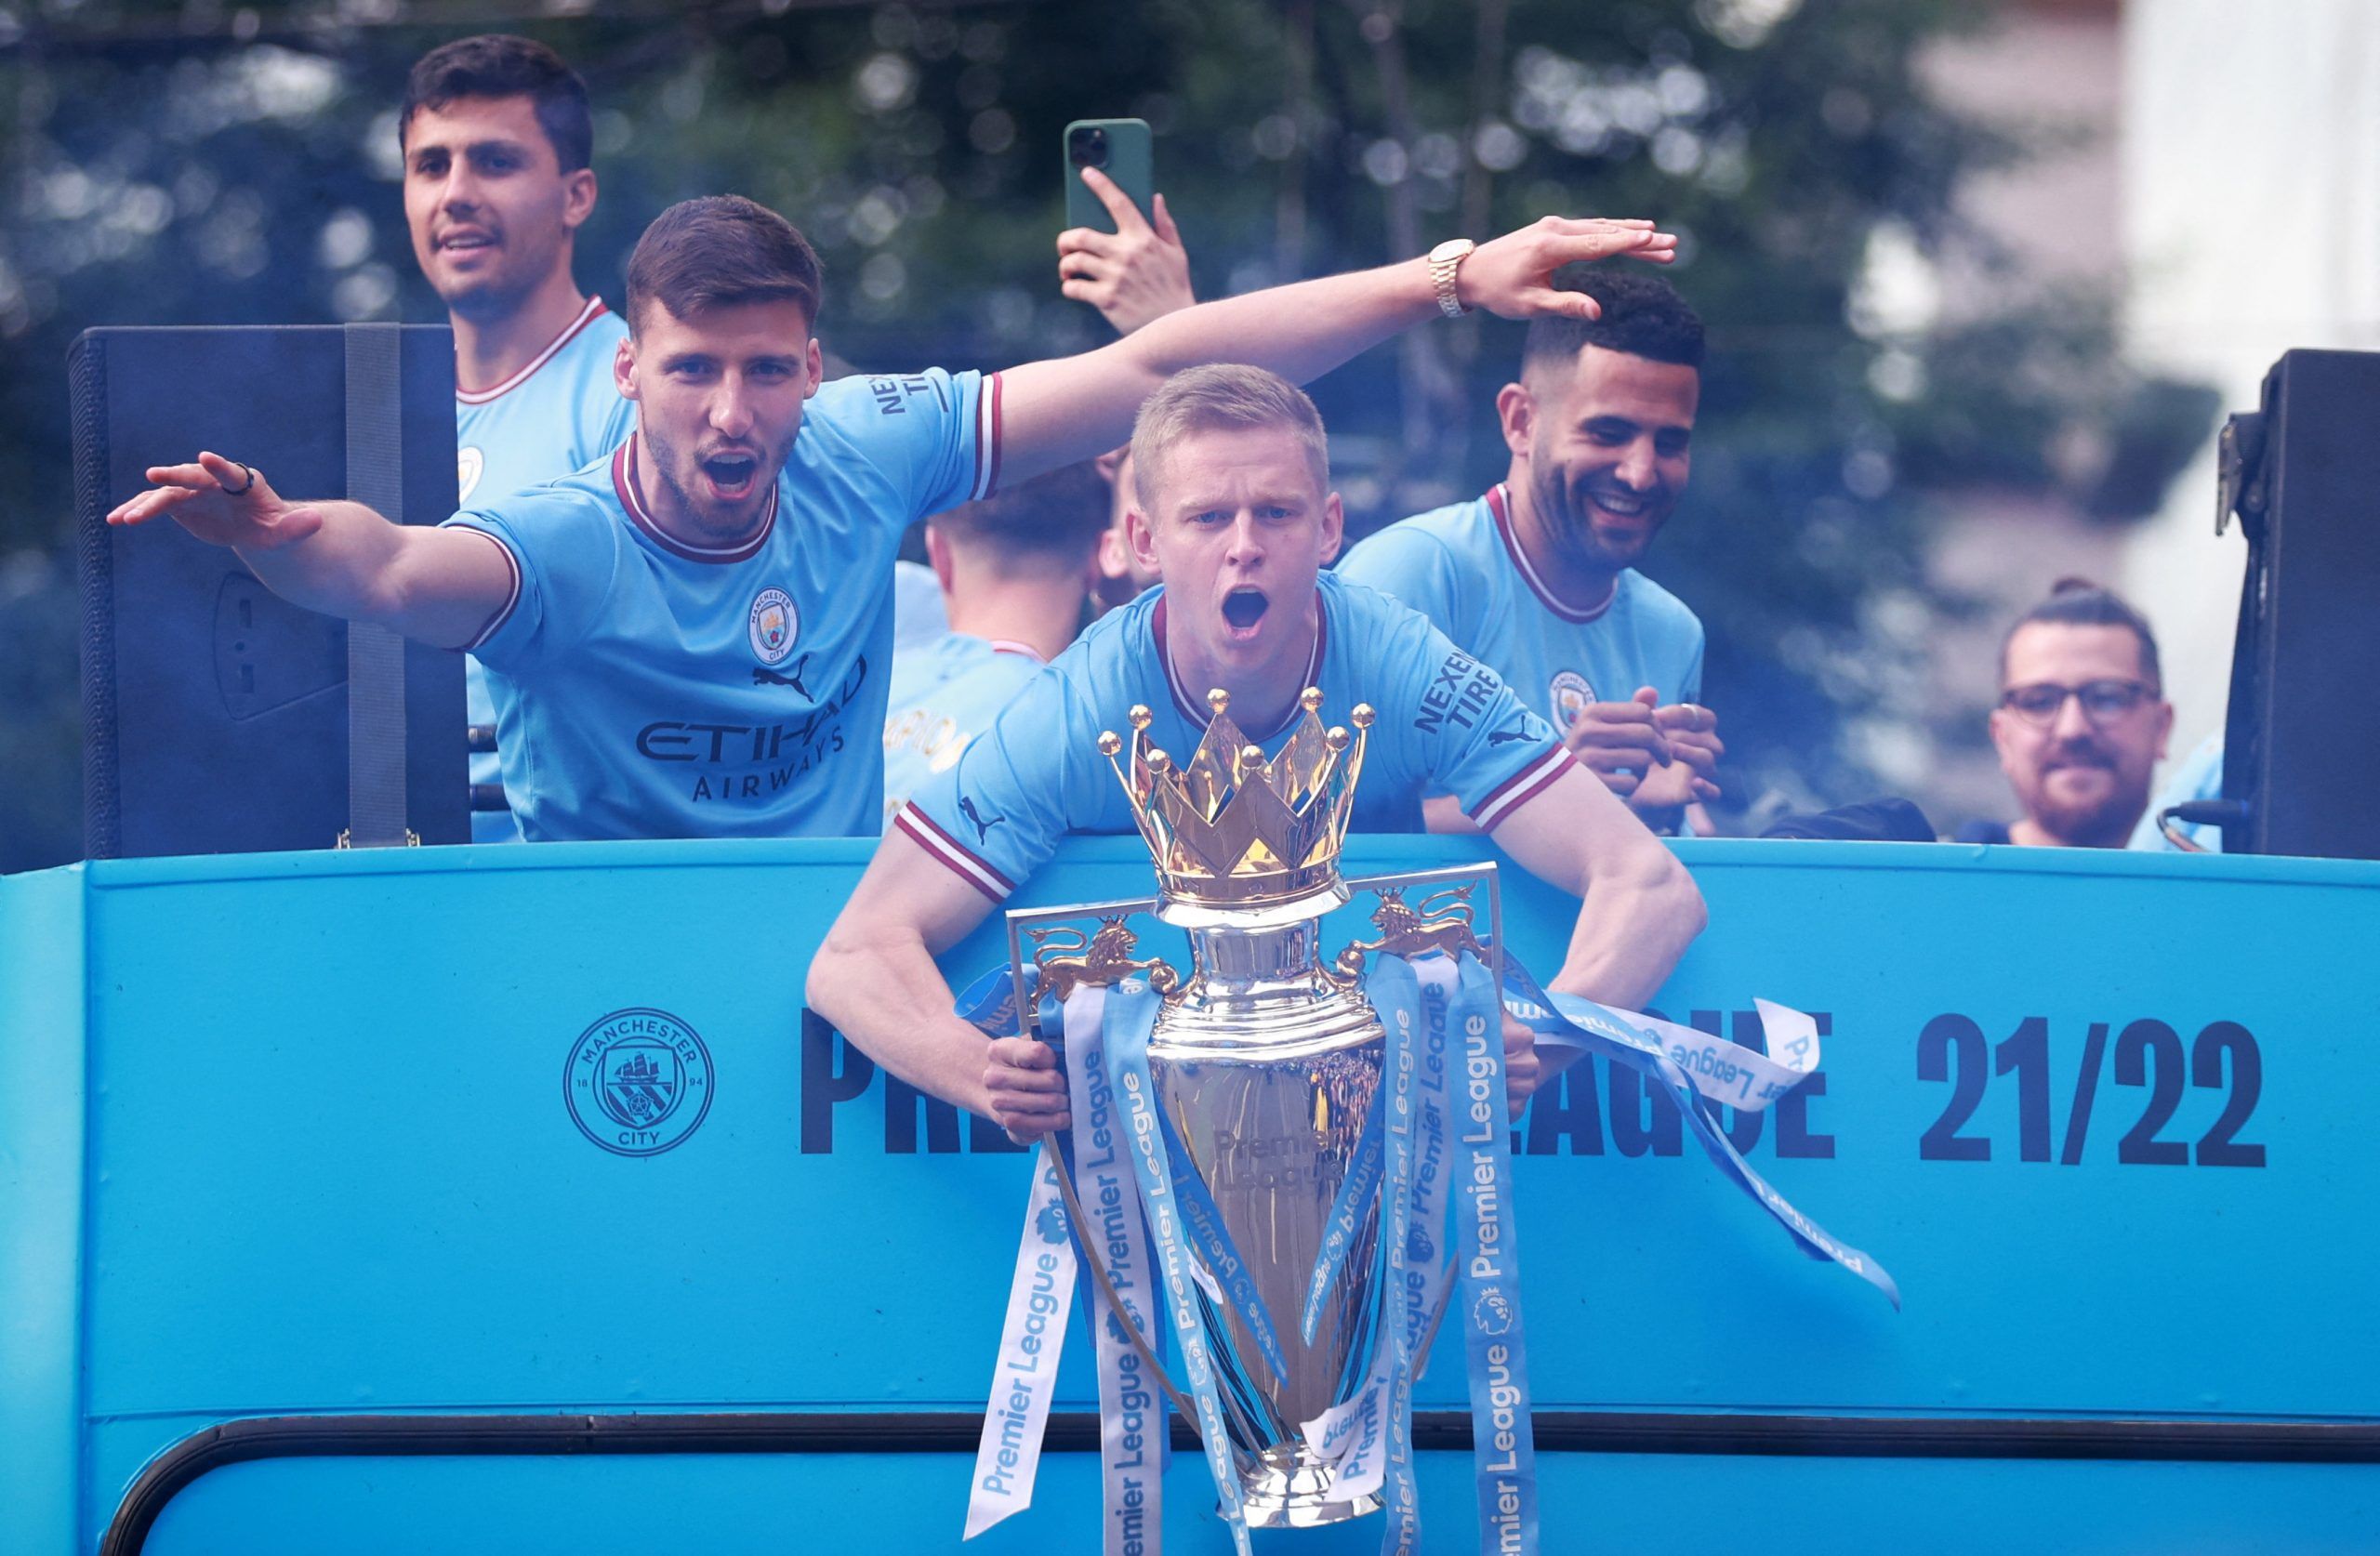 Soccer Football - Manchester City celebrate winning the Premier League - Manchester, Britain - May 23, 2022 Manchester City's Oleksandr Zinchenko, Riyad Mahrez and Ruben Dias celebrate with the Premier League trophy during the victory parade REUTERS/Hannah Mckay